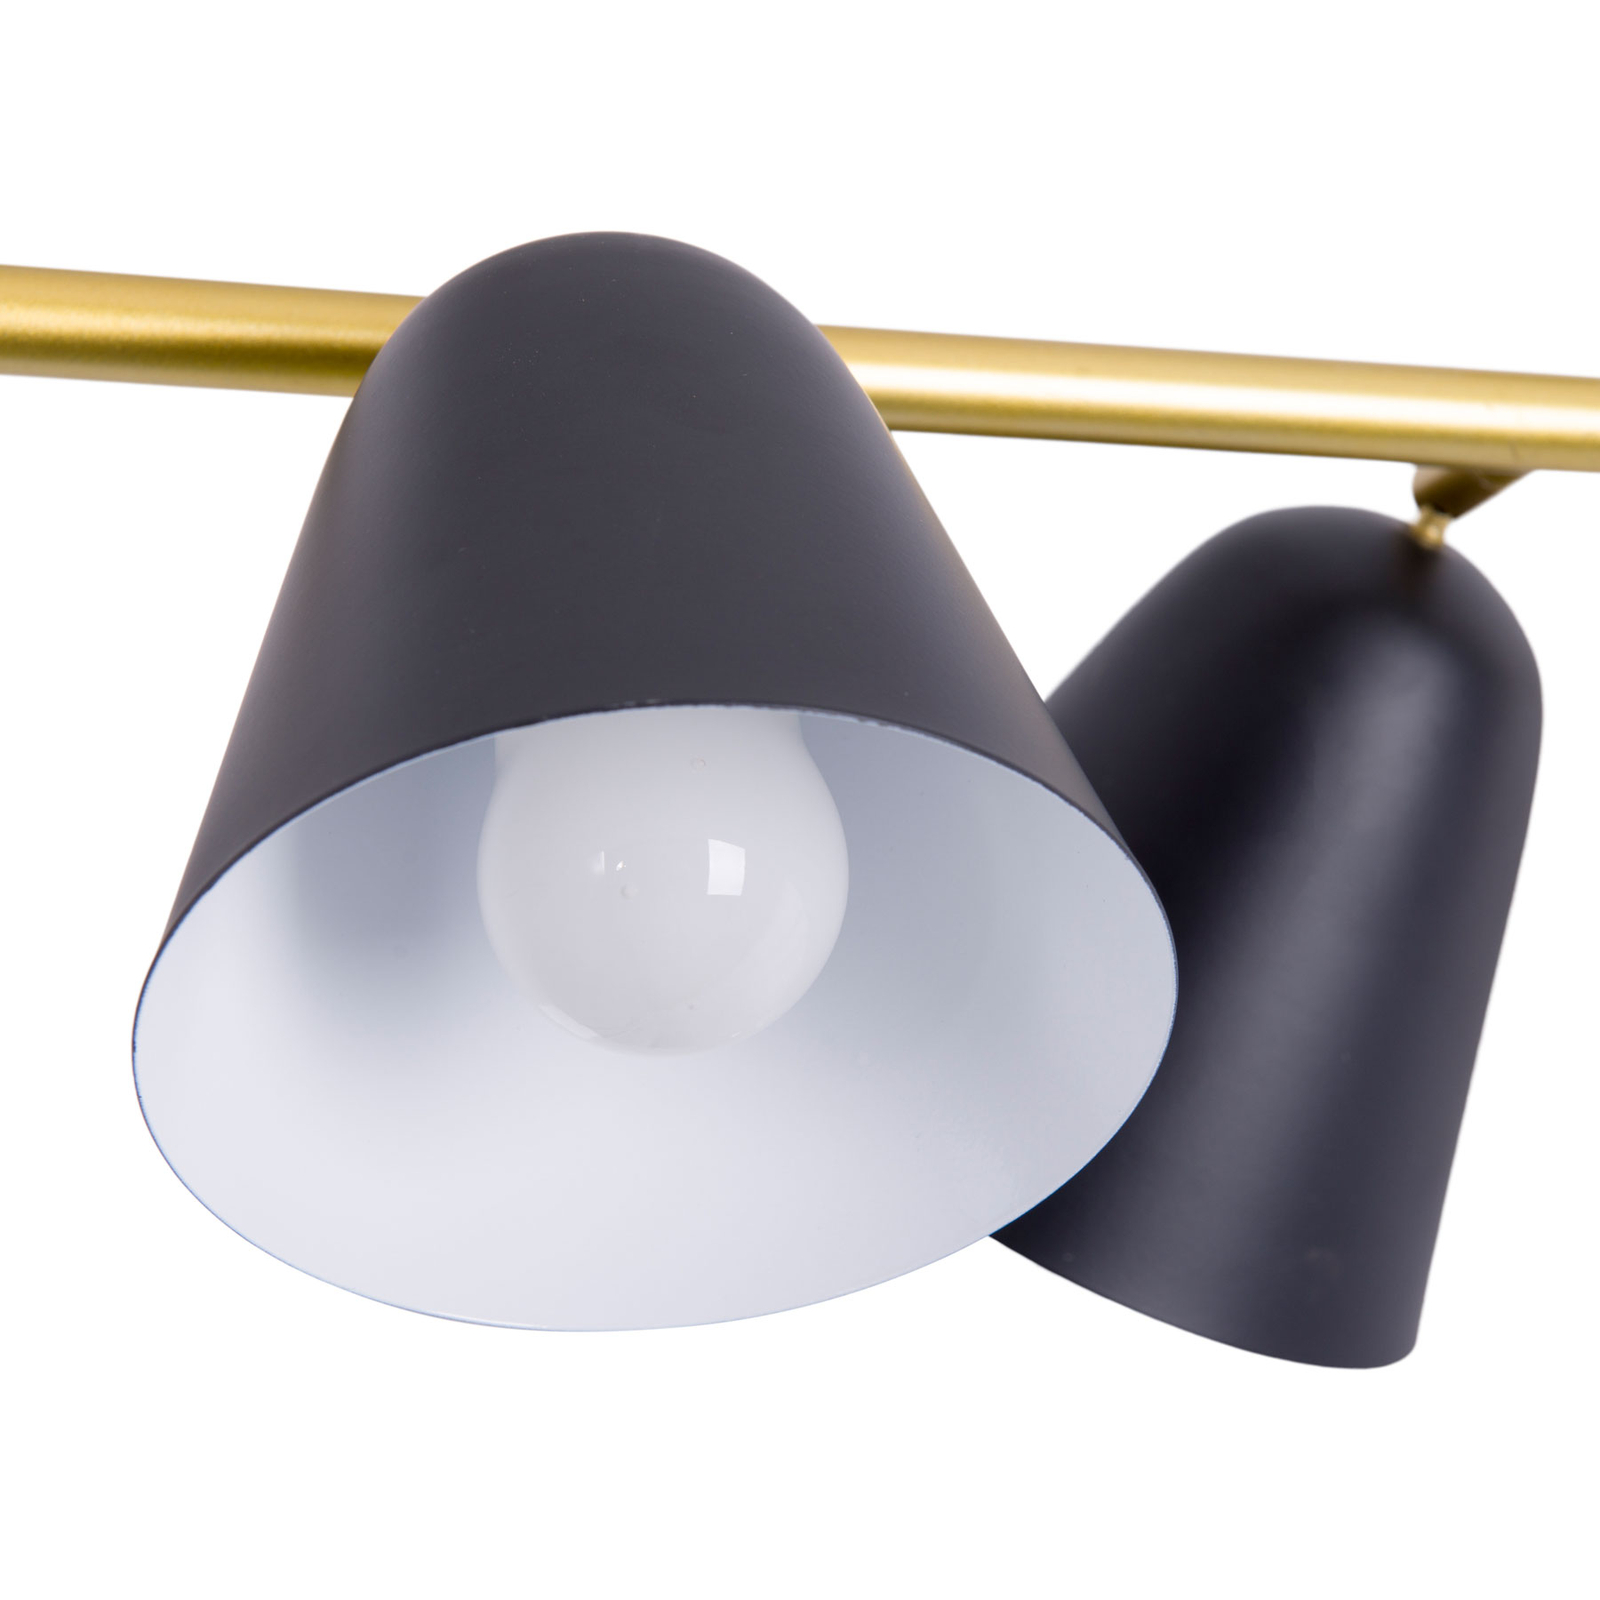 Triton hanging light, black and gold, four-bulb